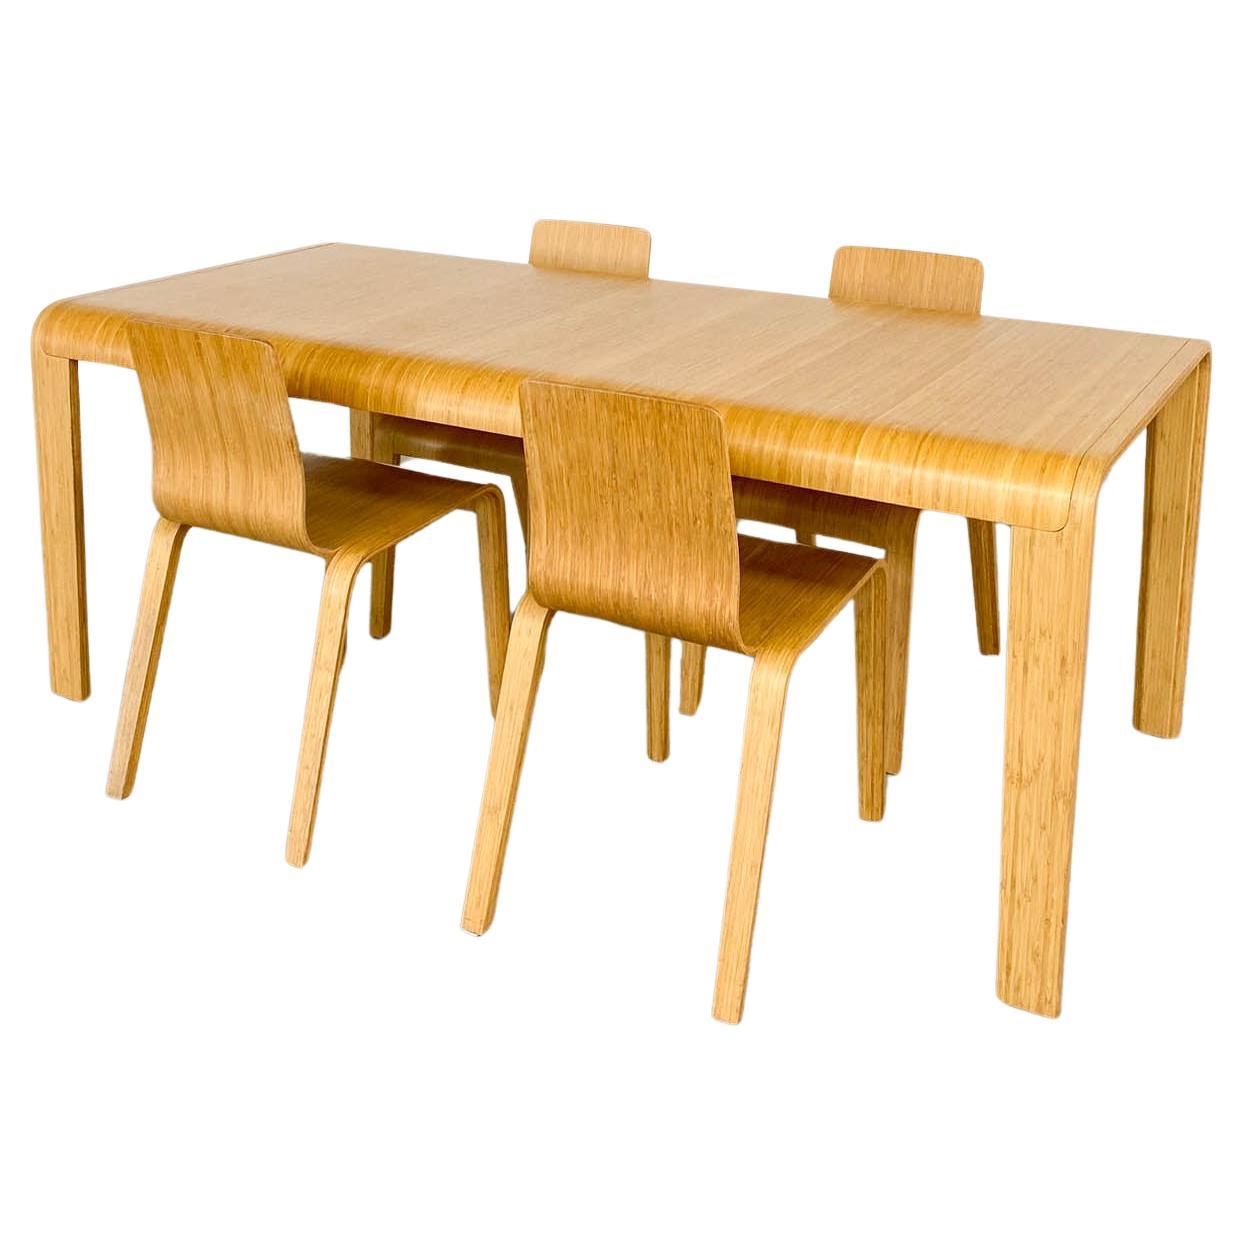 Bamboo Dining Set Table and Chairs by Henrik Tjaerby for Artek Studio, Set of 5